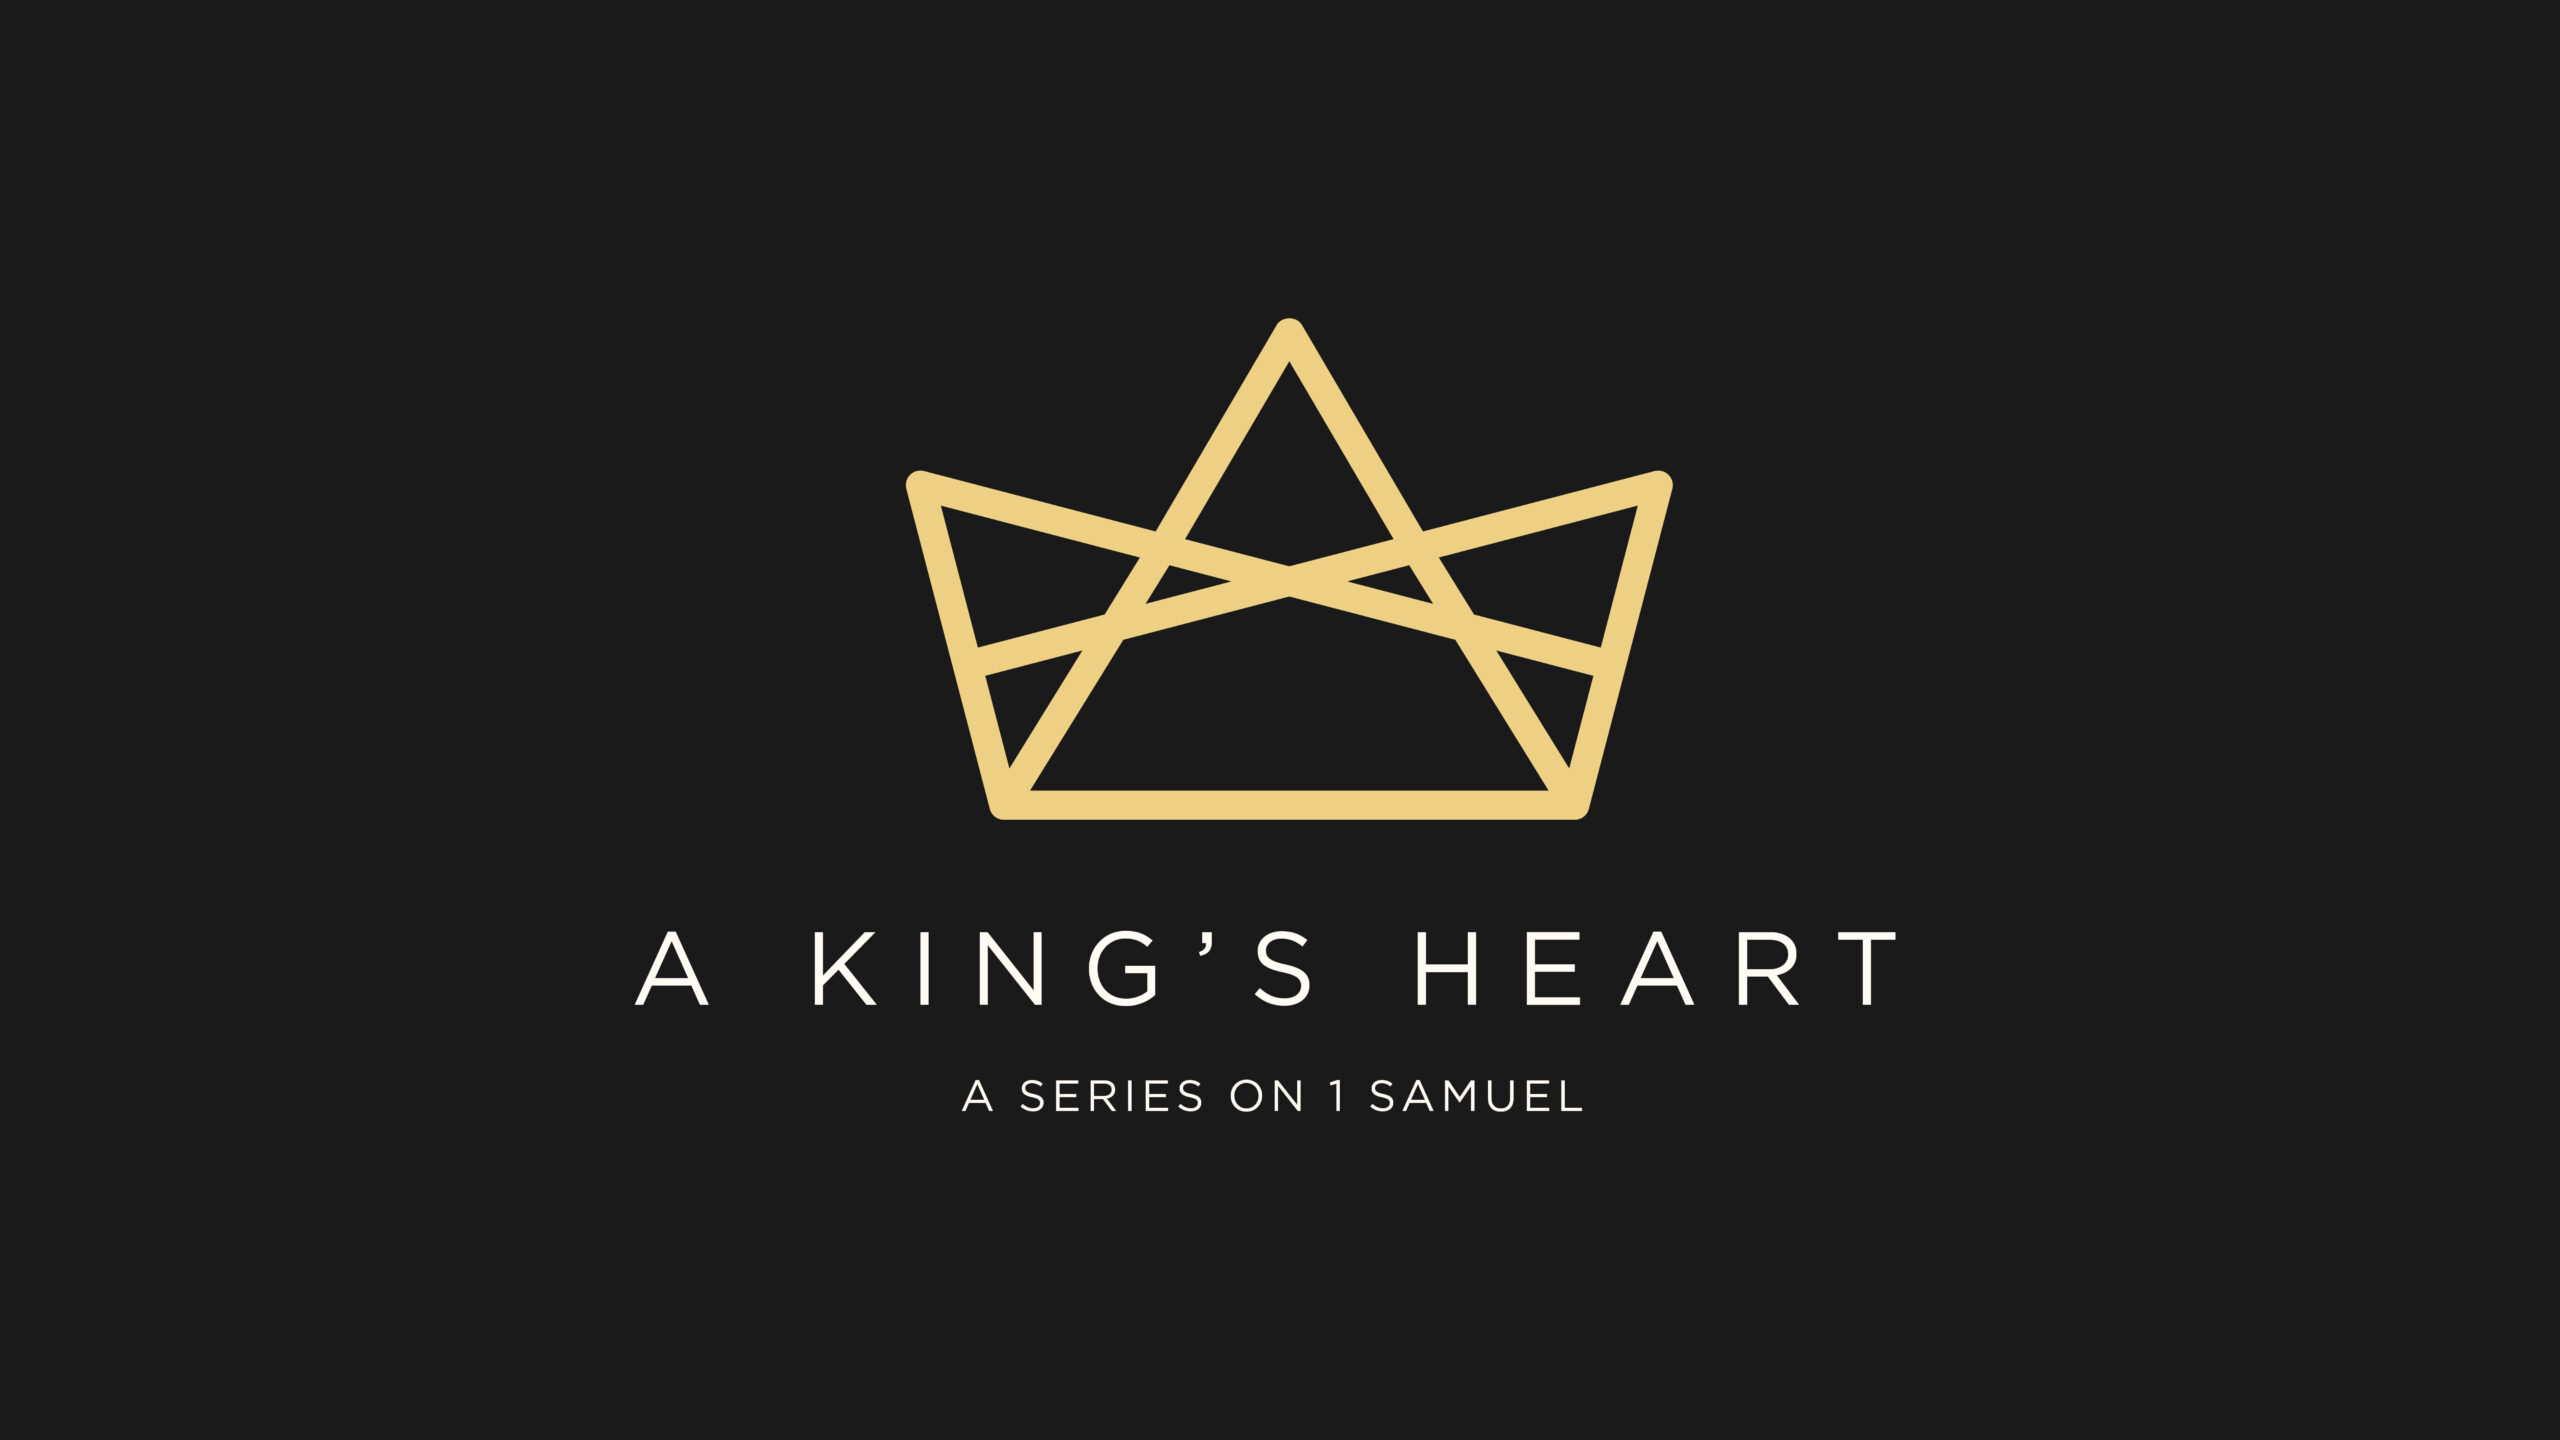 Featured Image for “A King’s Heart”